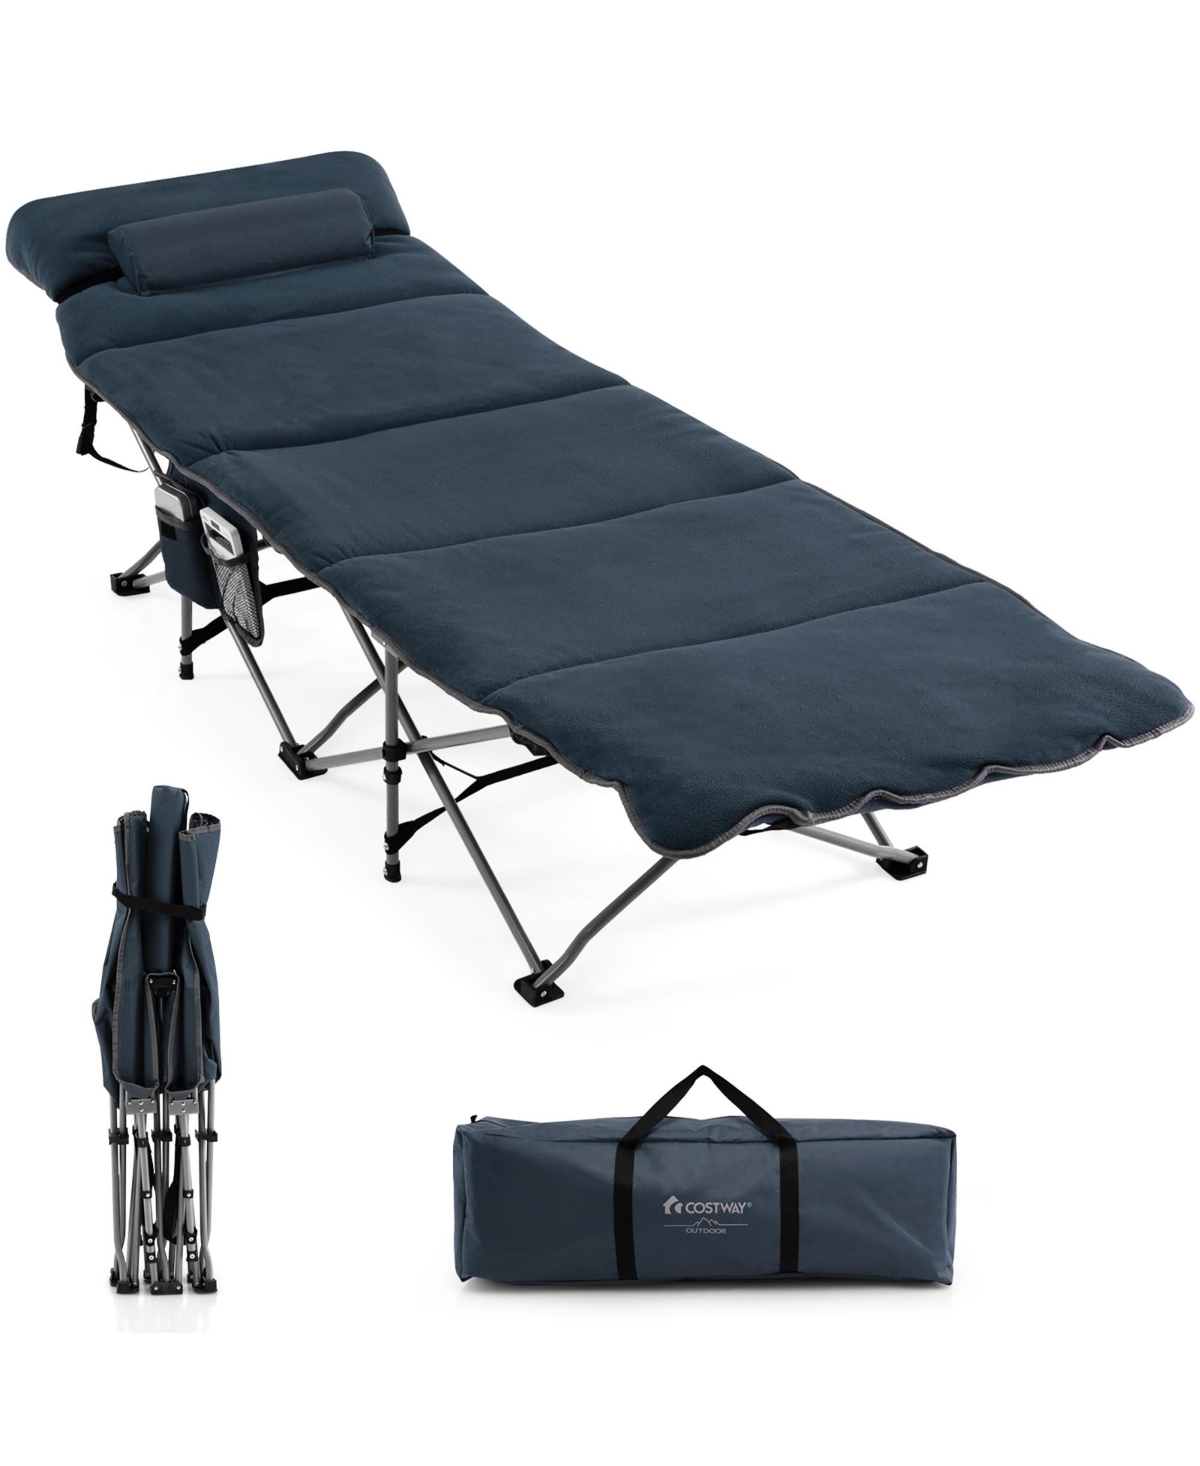 Folding Retractable Travel Camping Cot w/Removable Mattress & Carry Bag - Blue